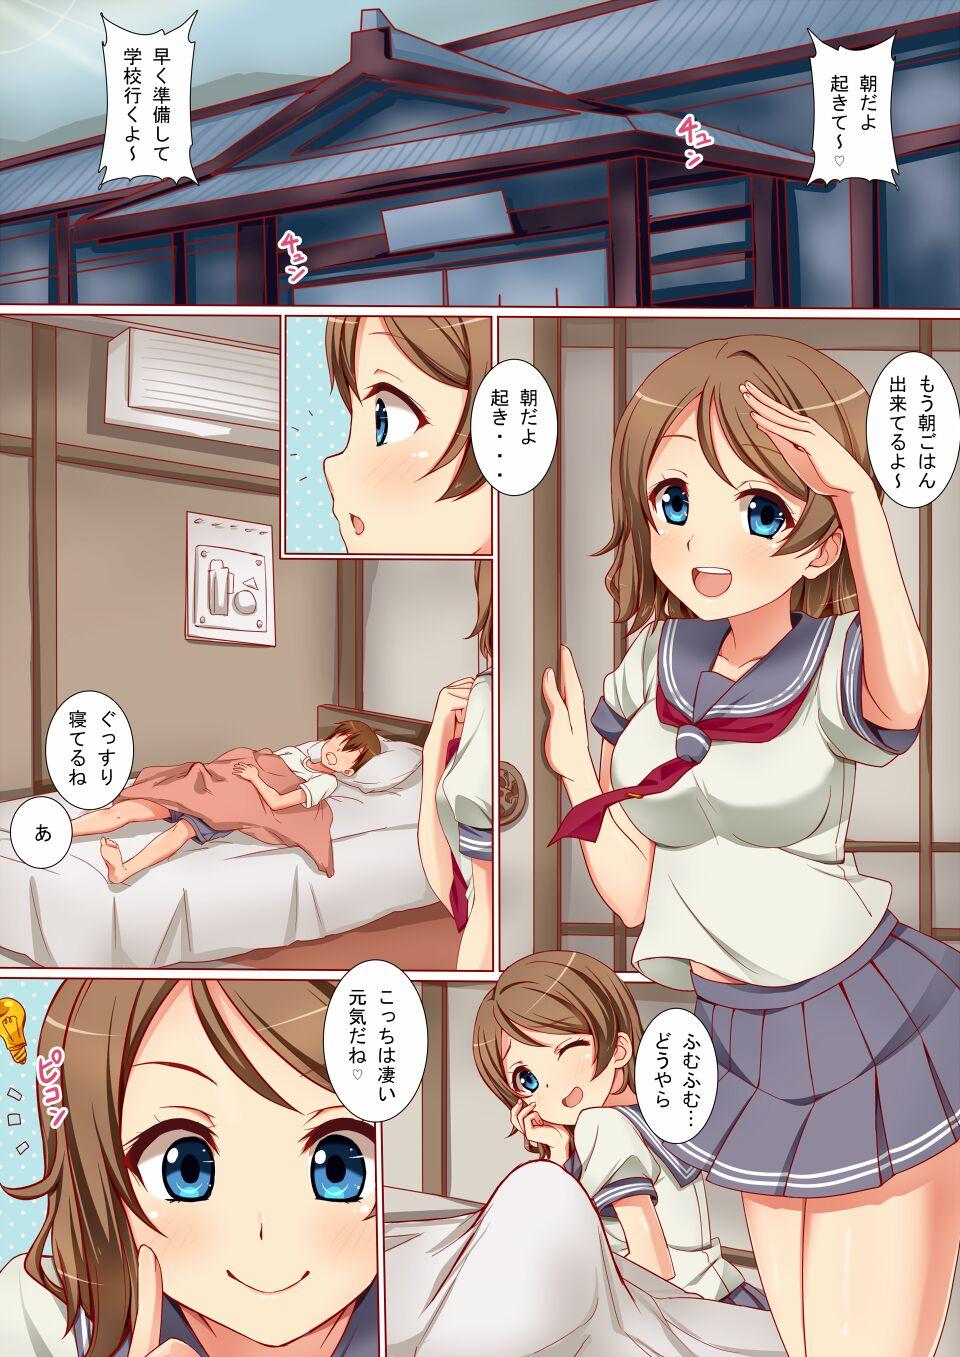 Black Morning flirting between two people - Love live sunshine Wet Cunts - Page 2